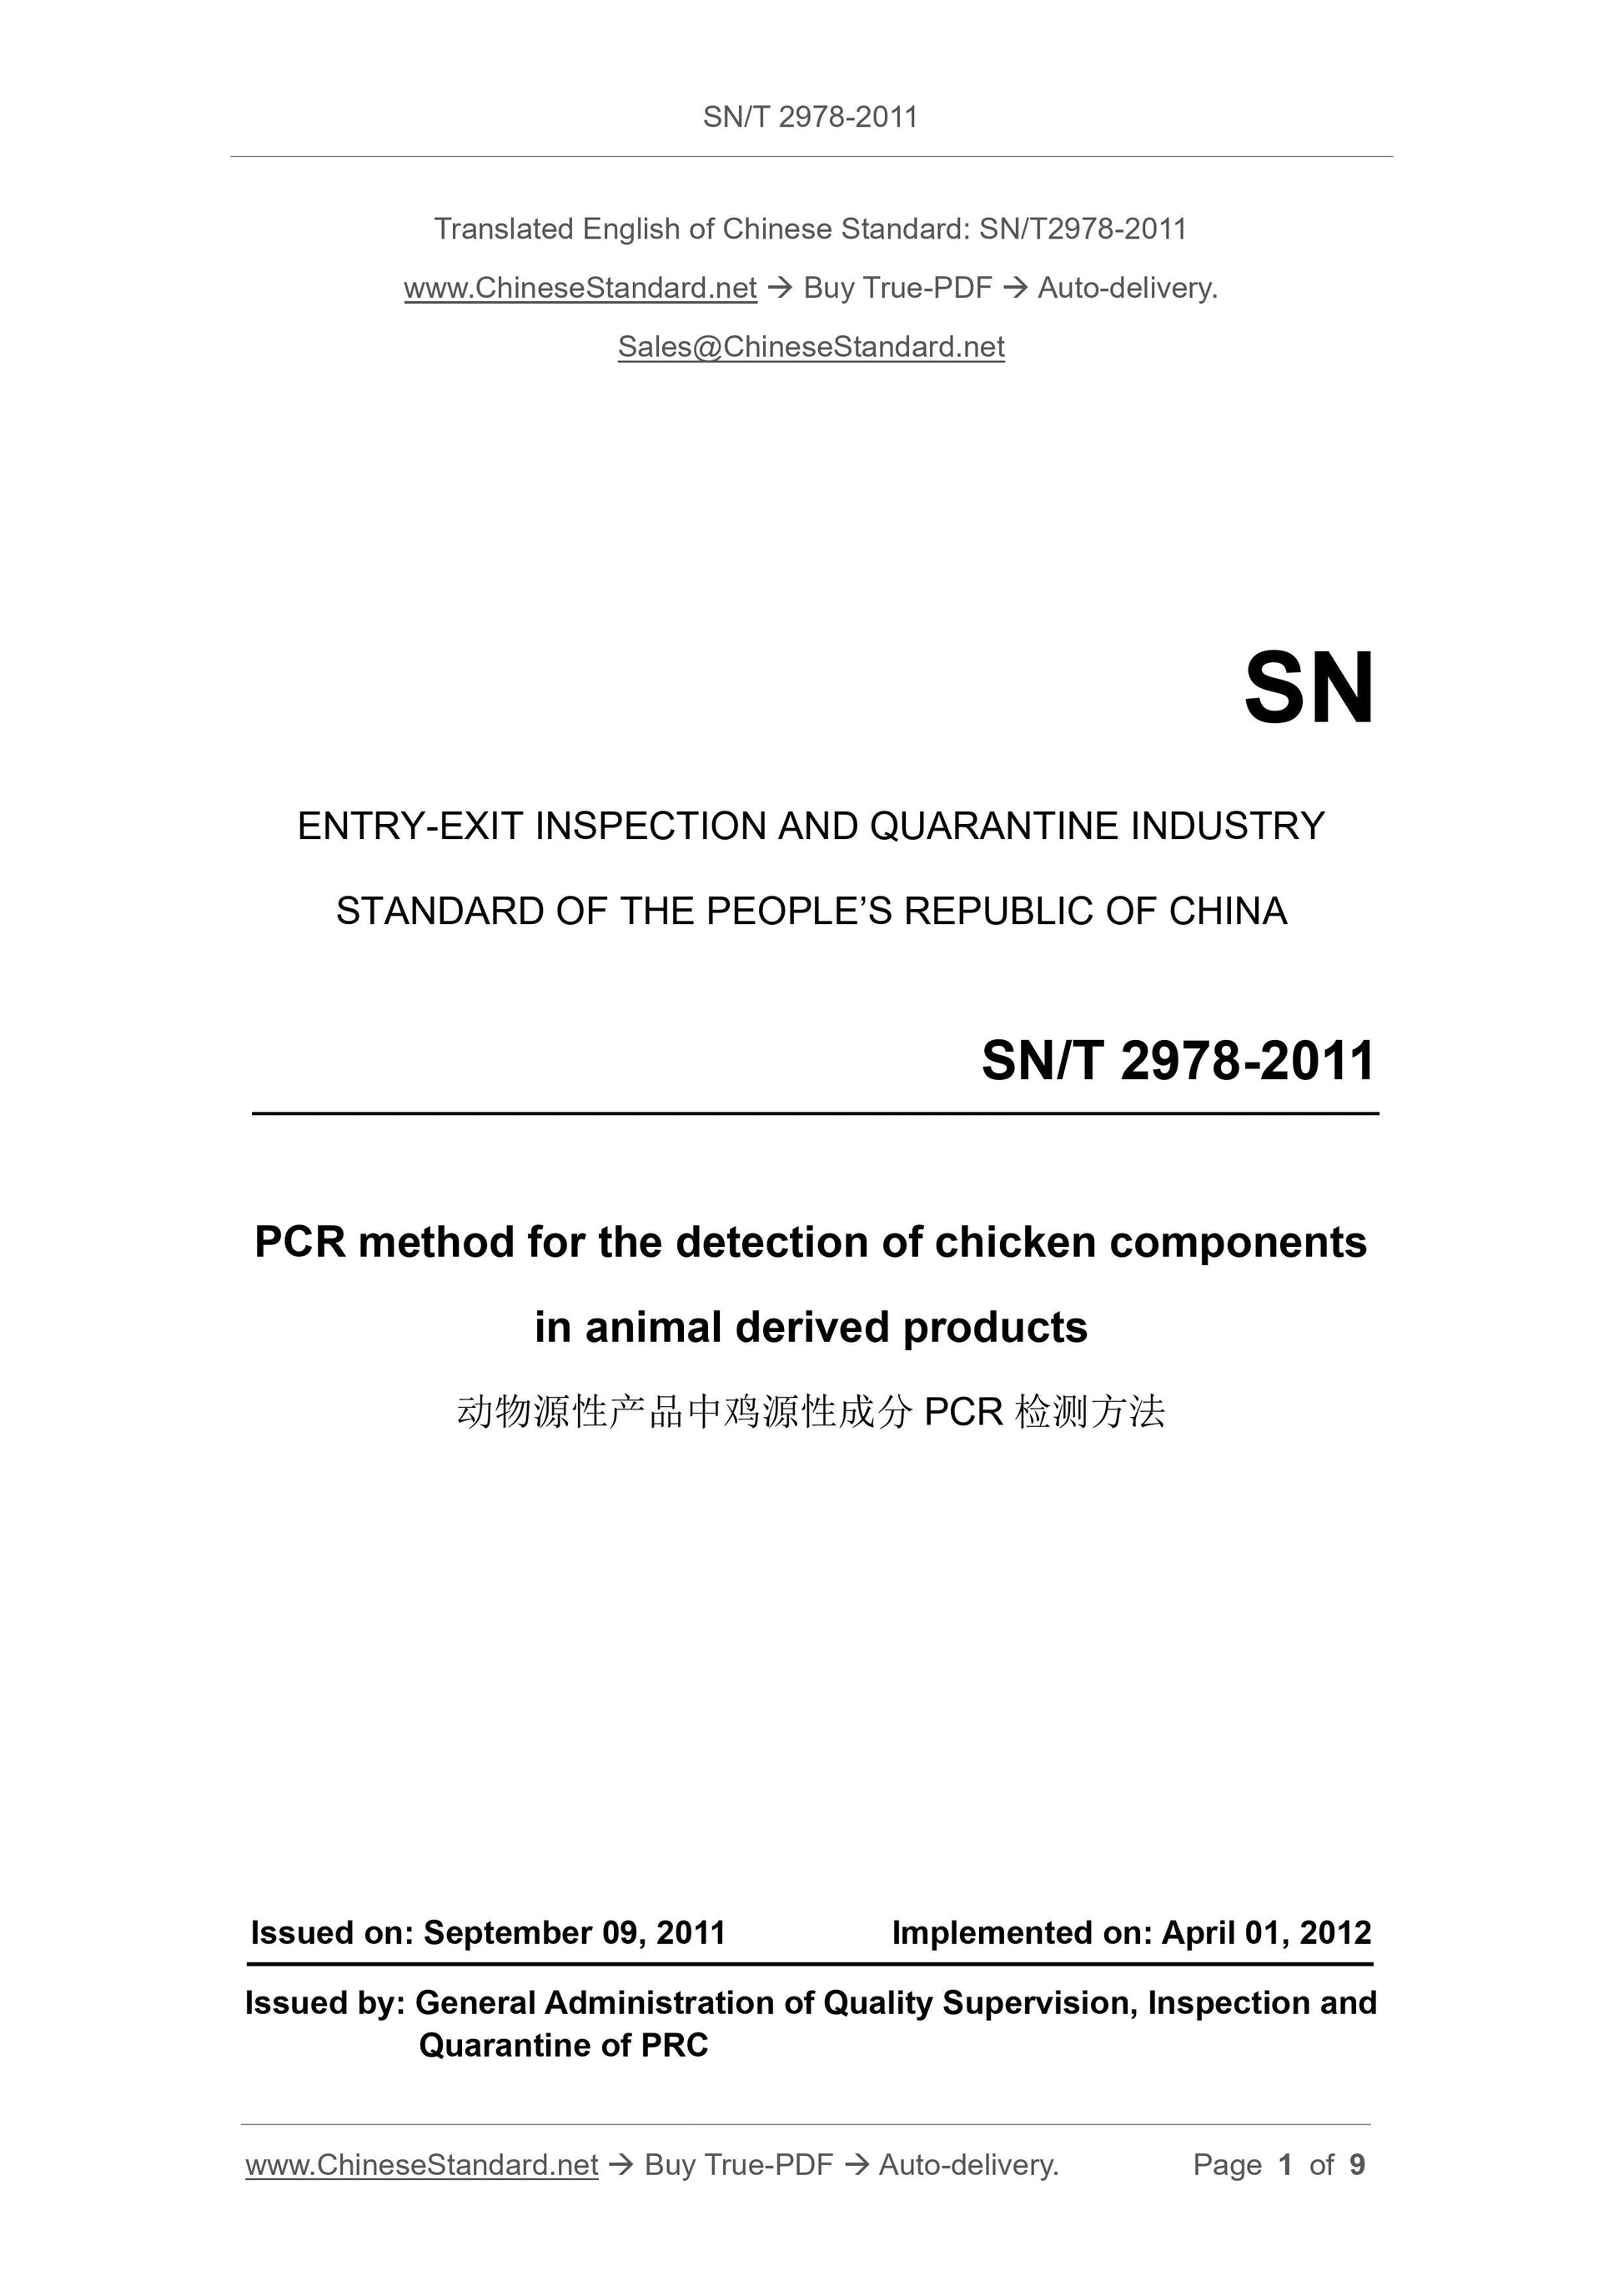 SN/T 2978-2011 Page 1